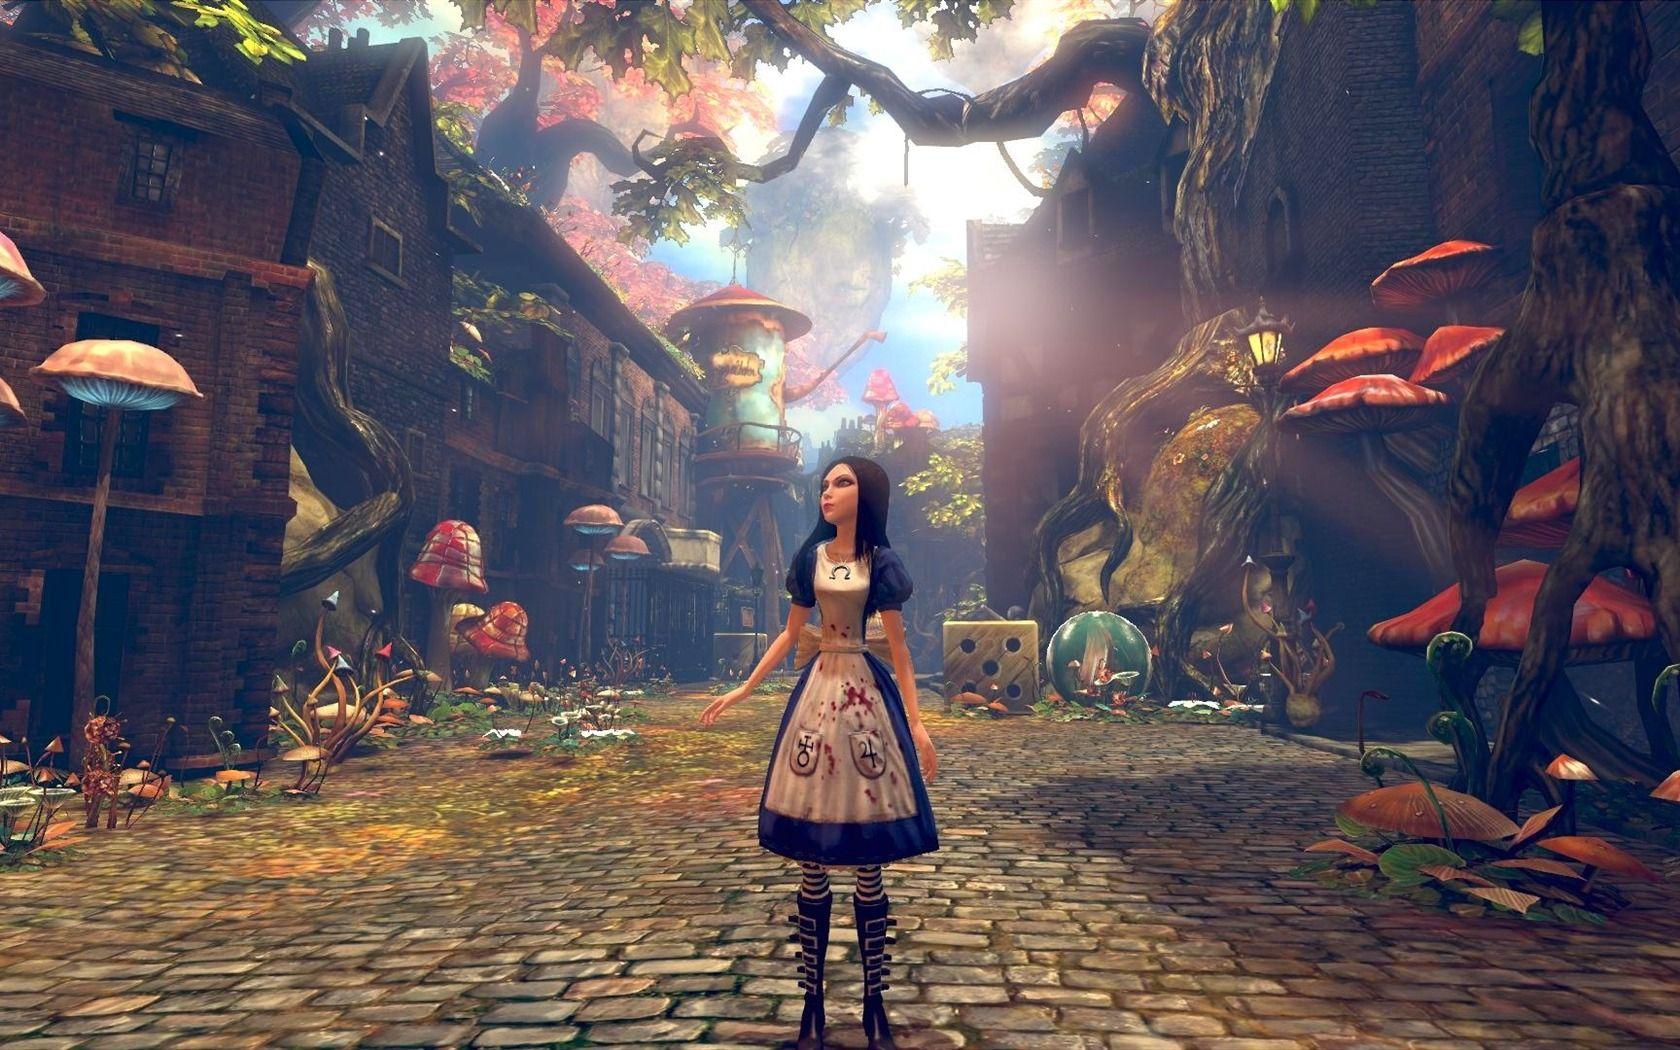 Alice Madness Returns Computer Wallpapers Desktop Backgrounds  1920x1080   ID467850  Alice madness returns Alice madness American mcgees alice